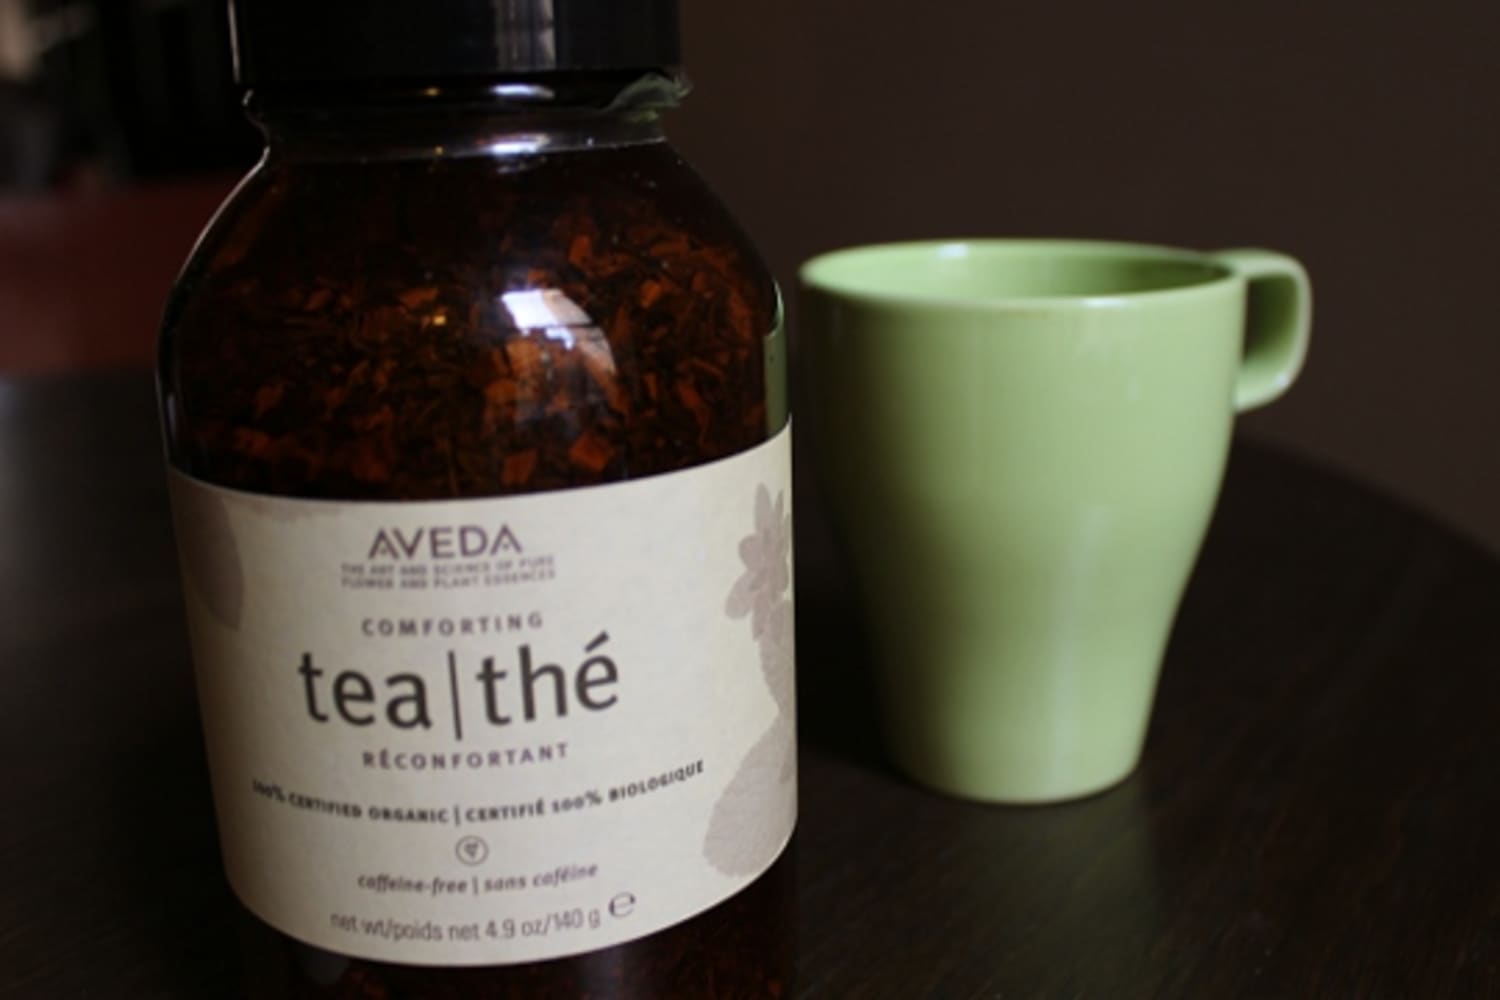 Product Review: Aveda Comforting Tea | Kitchn